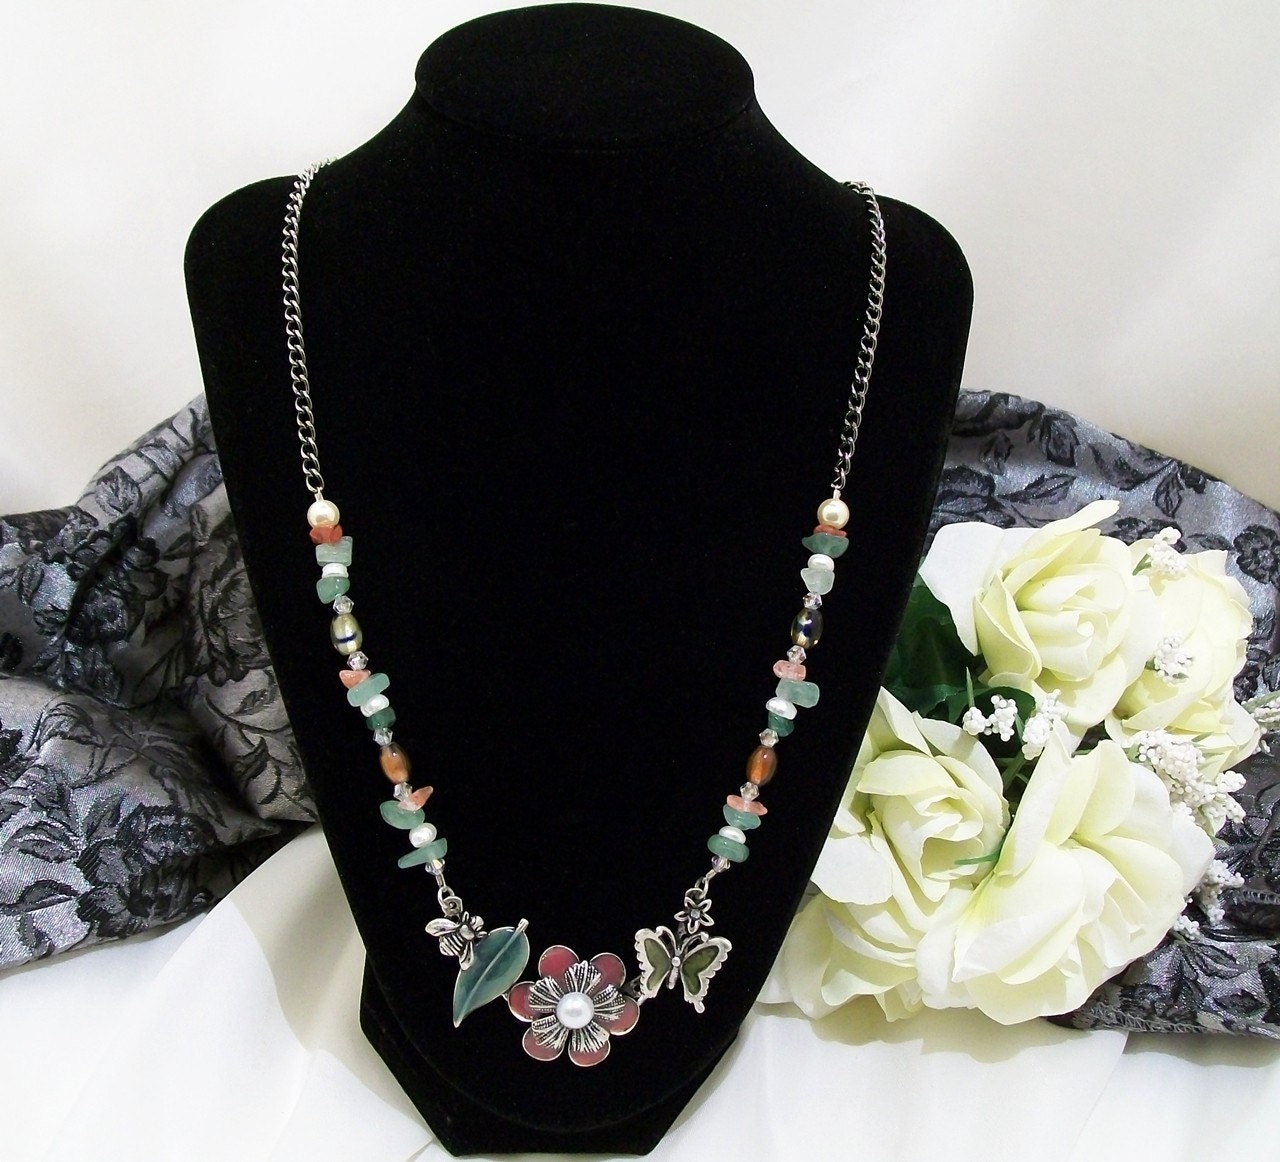 Bumble Bees and Butterflies Necklace